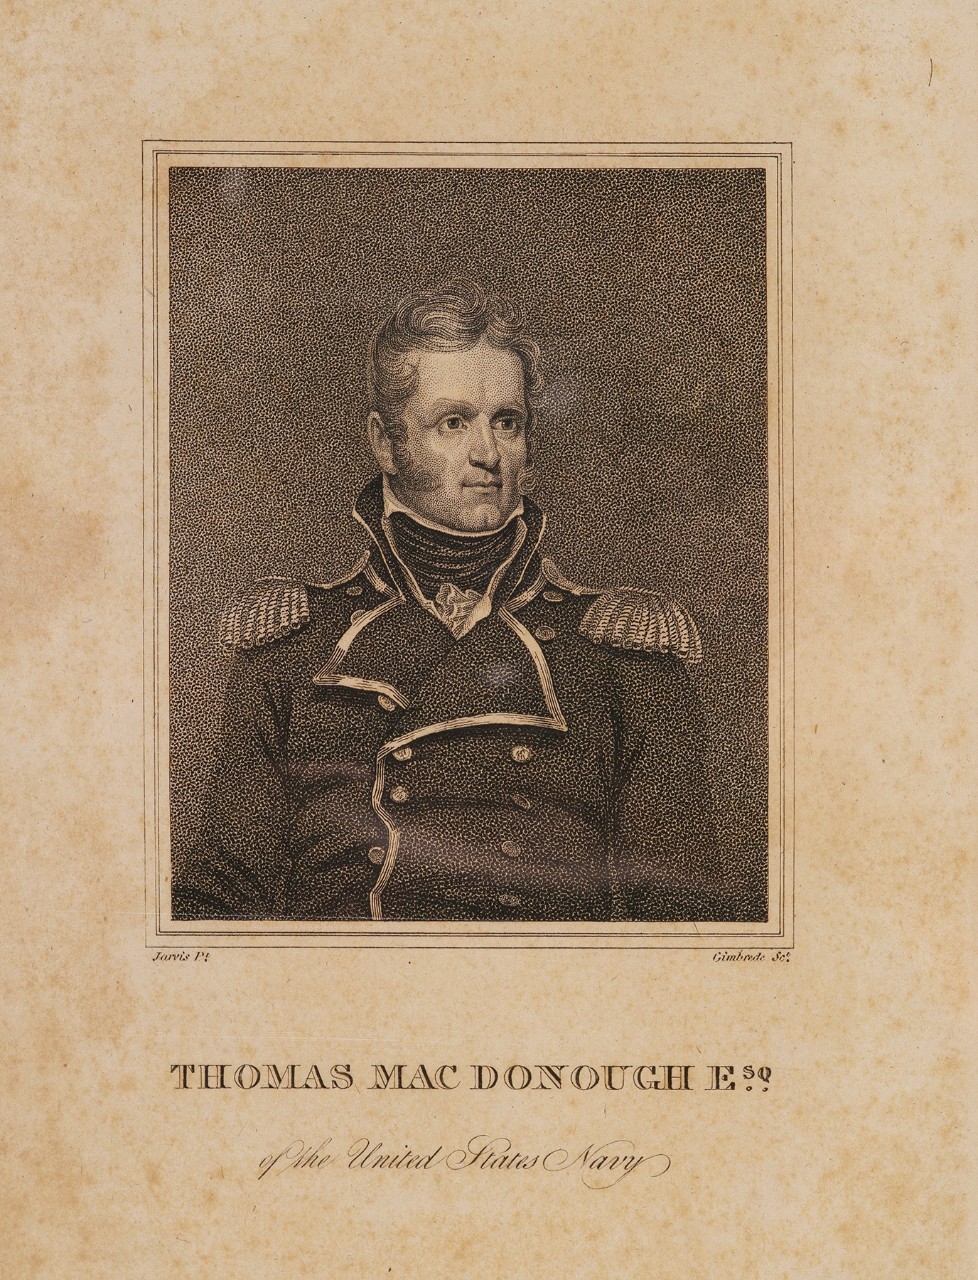 Portrait of a man in an early 19th century uniform